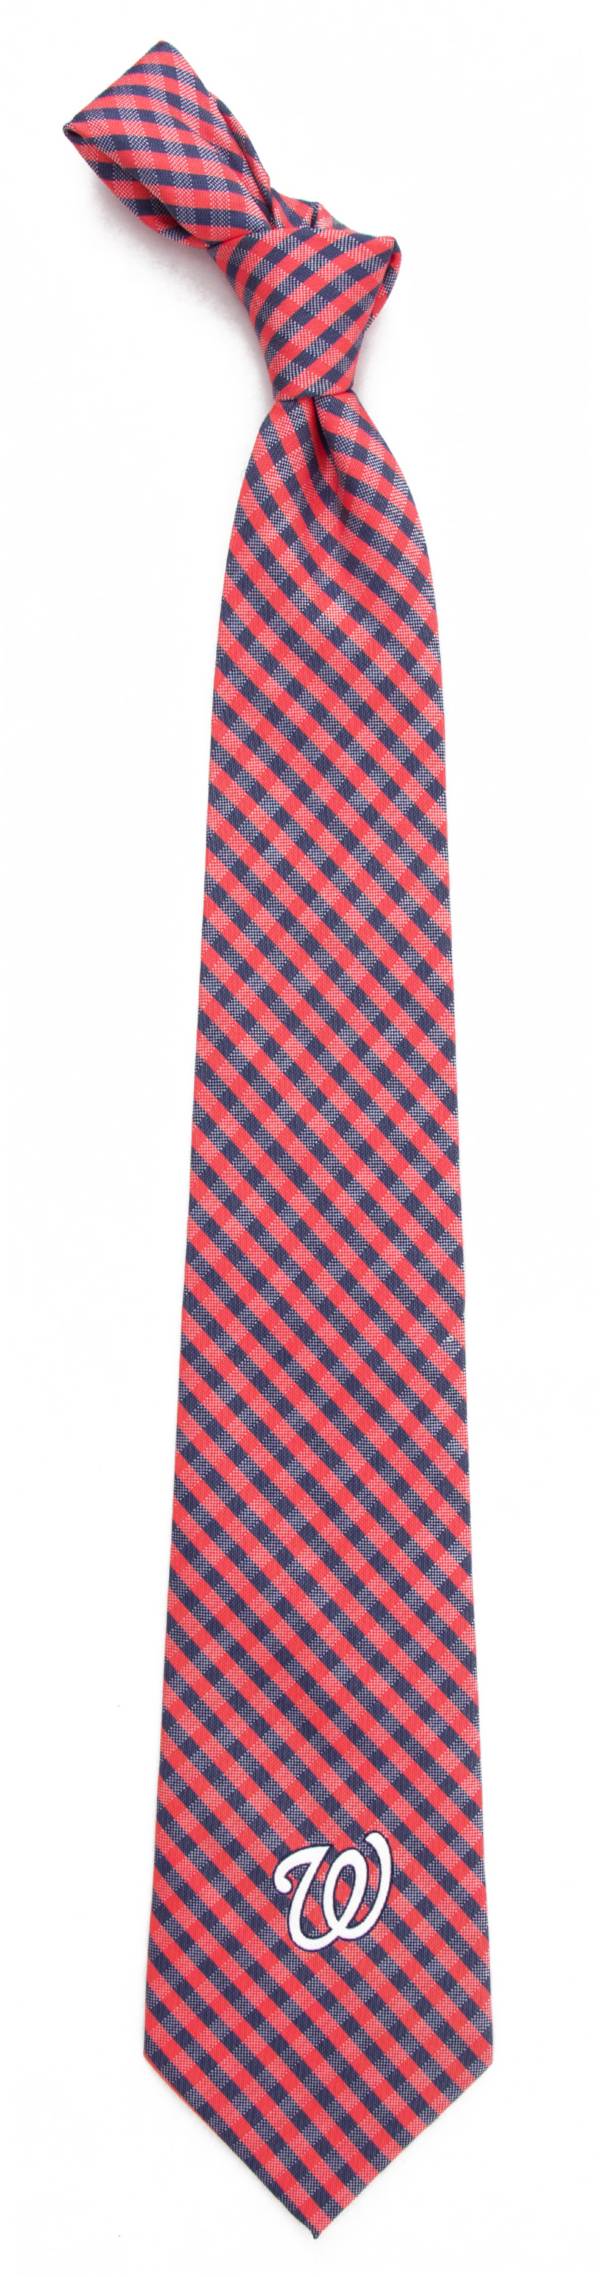 Eagles Wings Washington Nationals Gingham Necktie product image